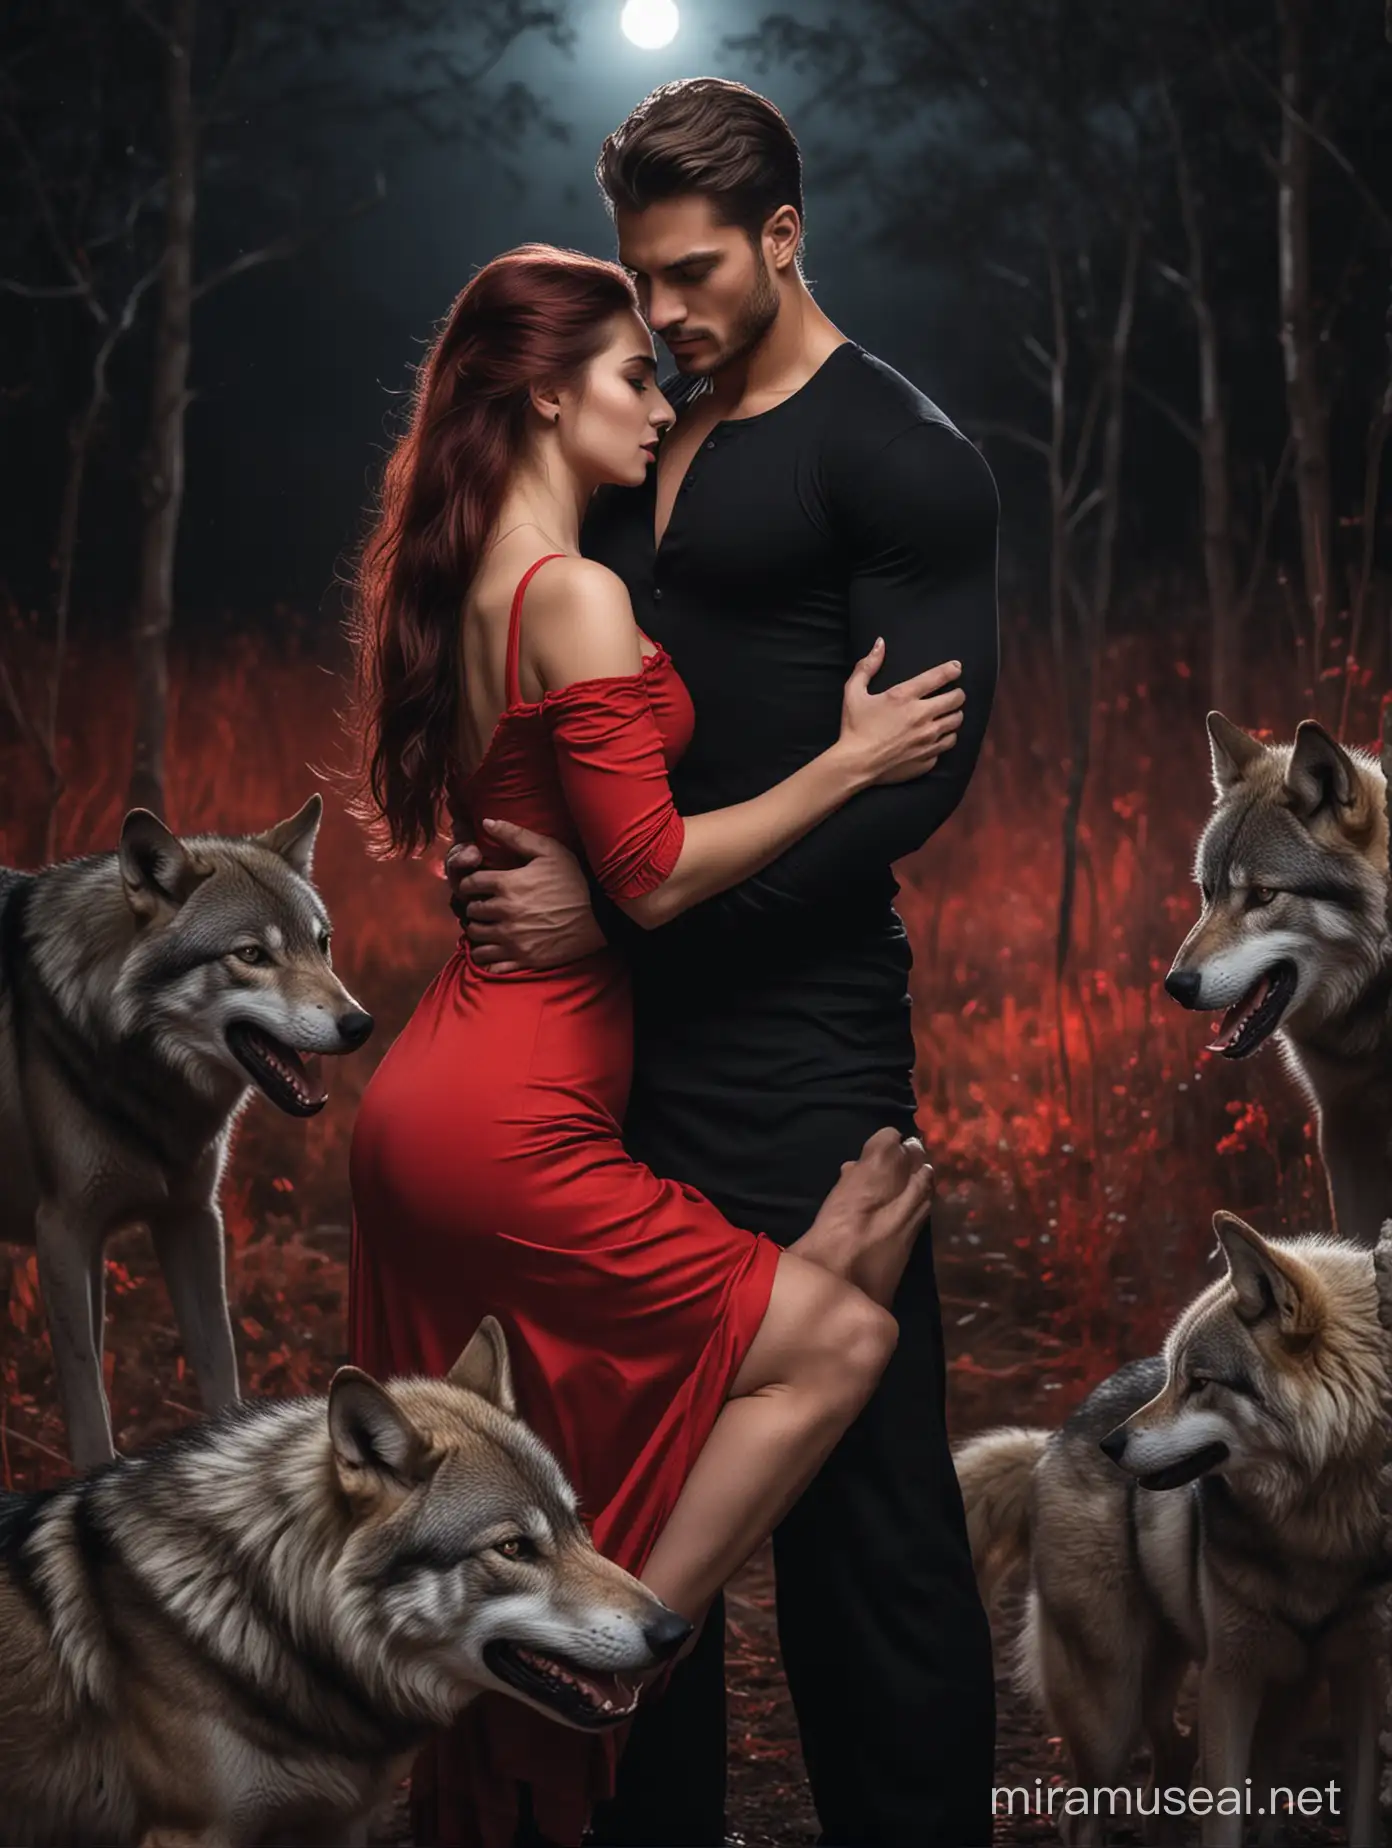 Romantic Couple Embraced by Wolves in Nighttime Wilderness